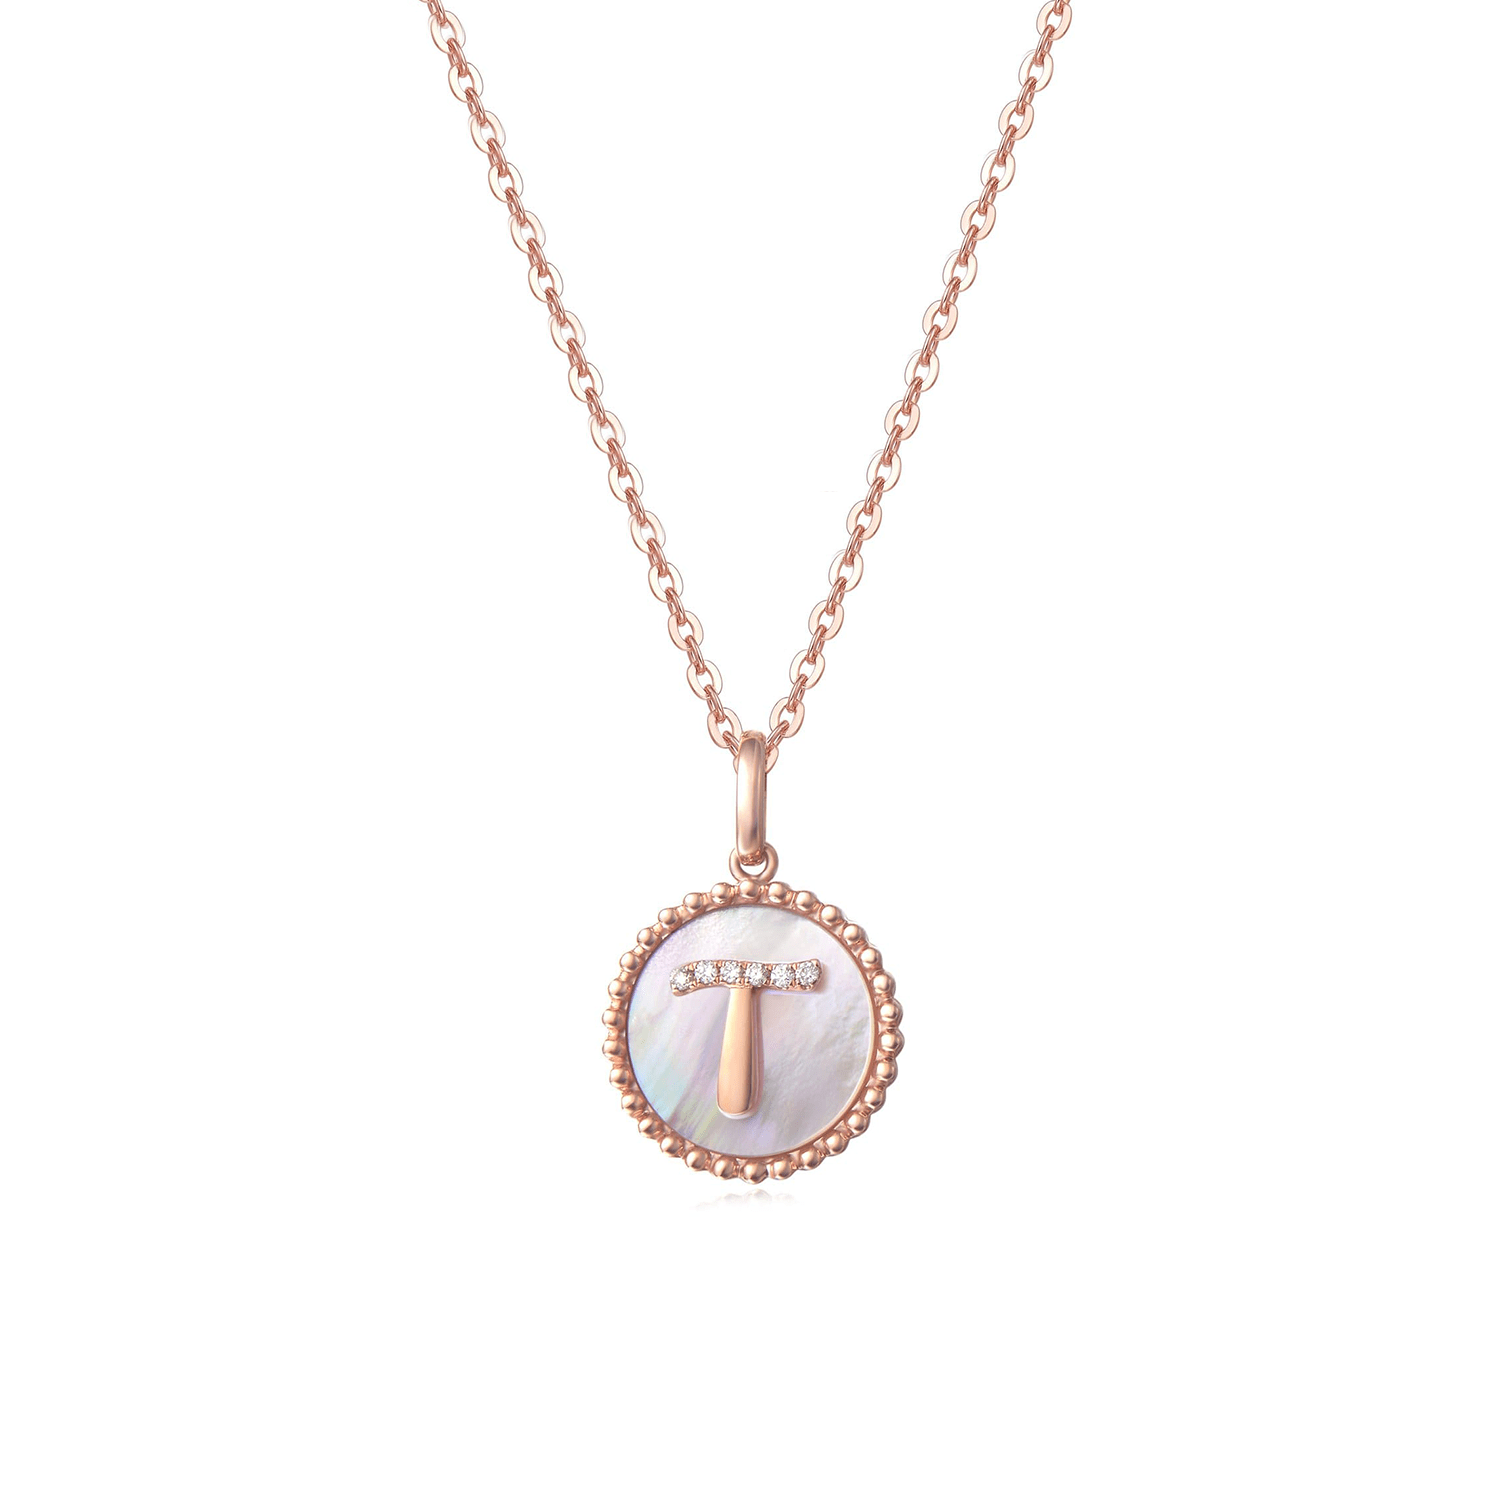 FANCIME "T" Initial Dainty Solid 14K Rose Gold Necklace Main